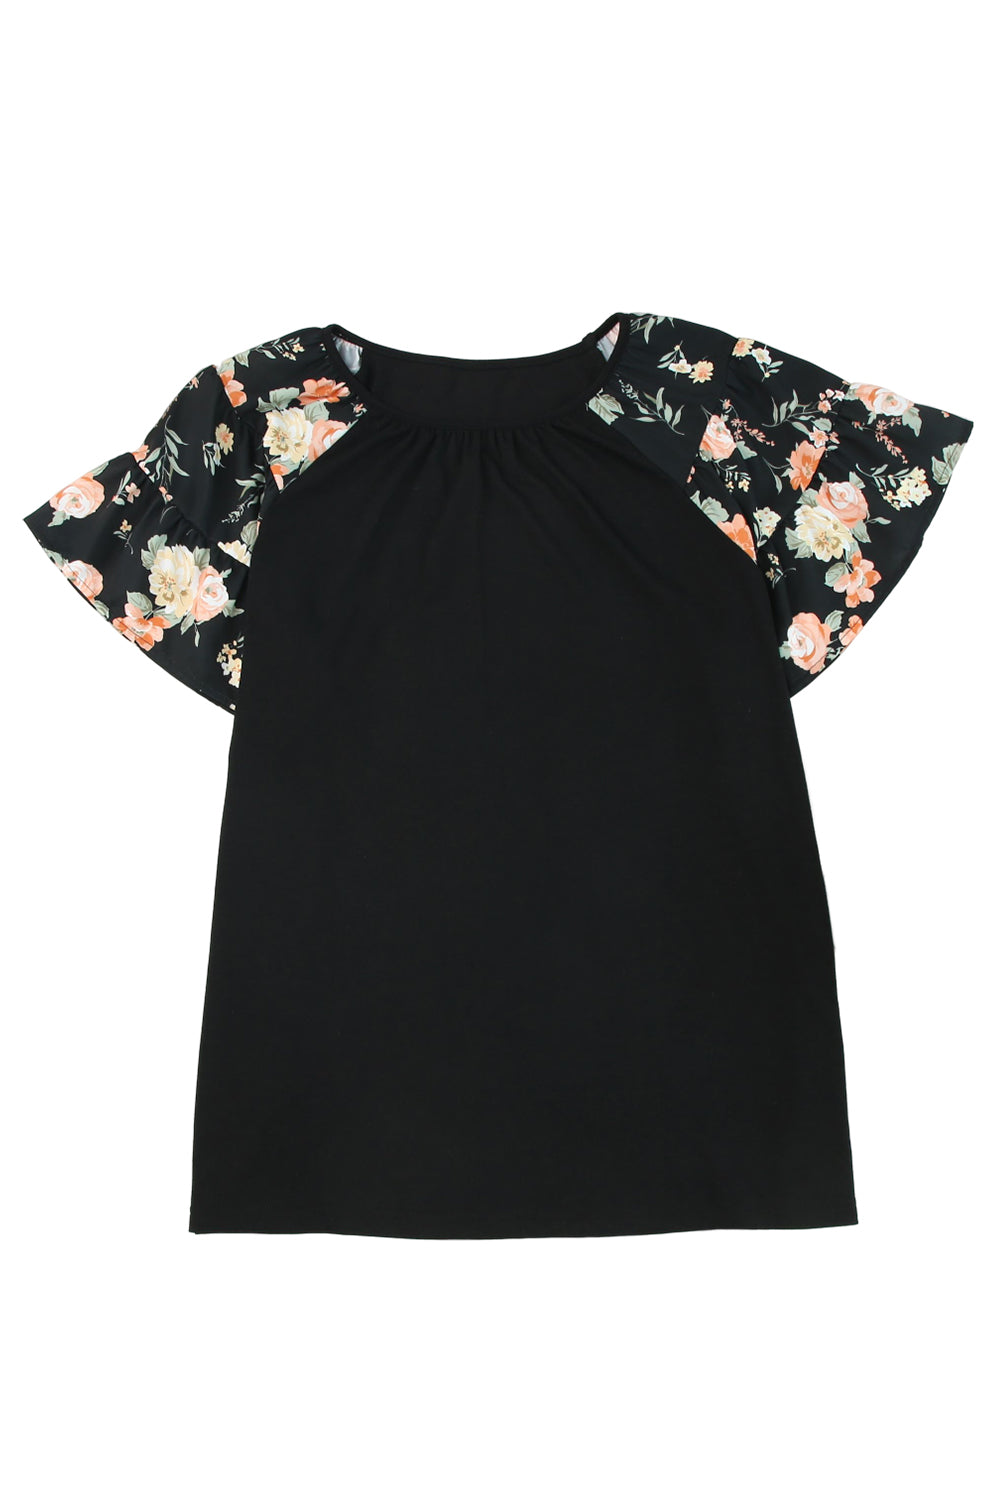 Black Floral Ruffle Sleeve Plus Size Top